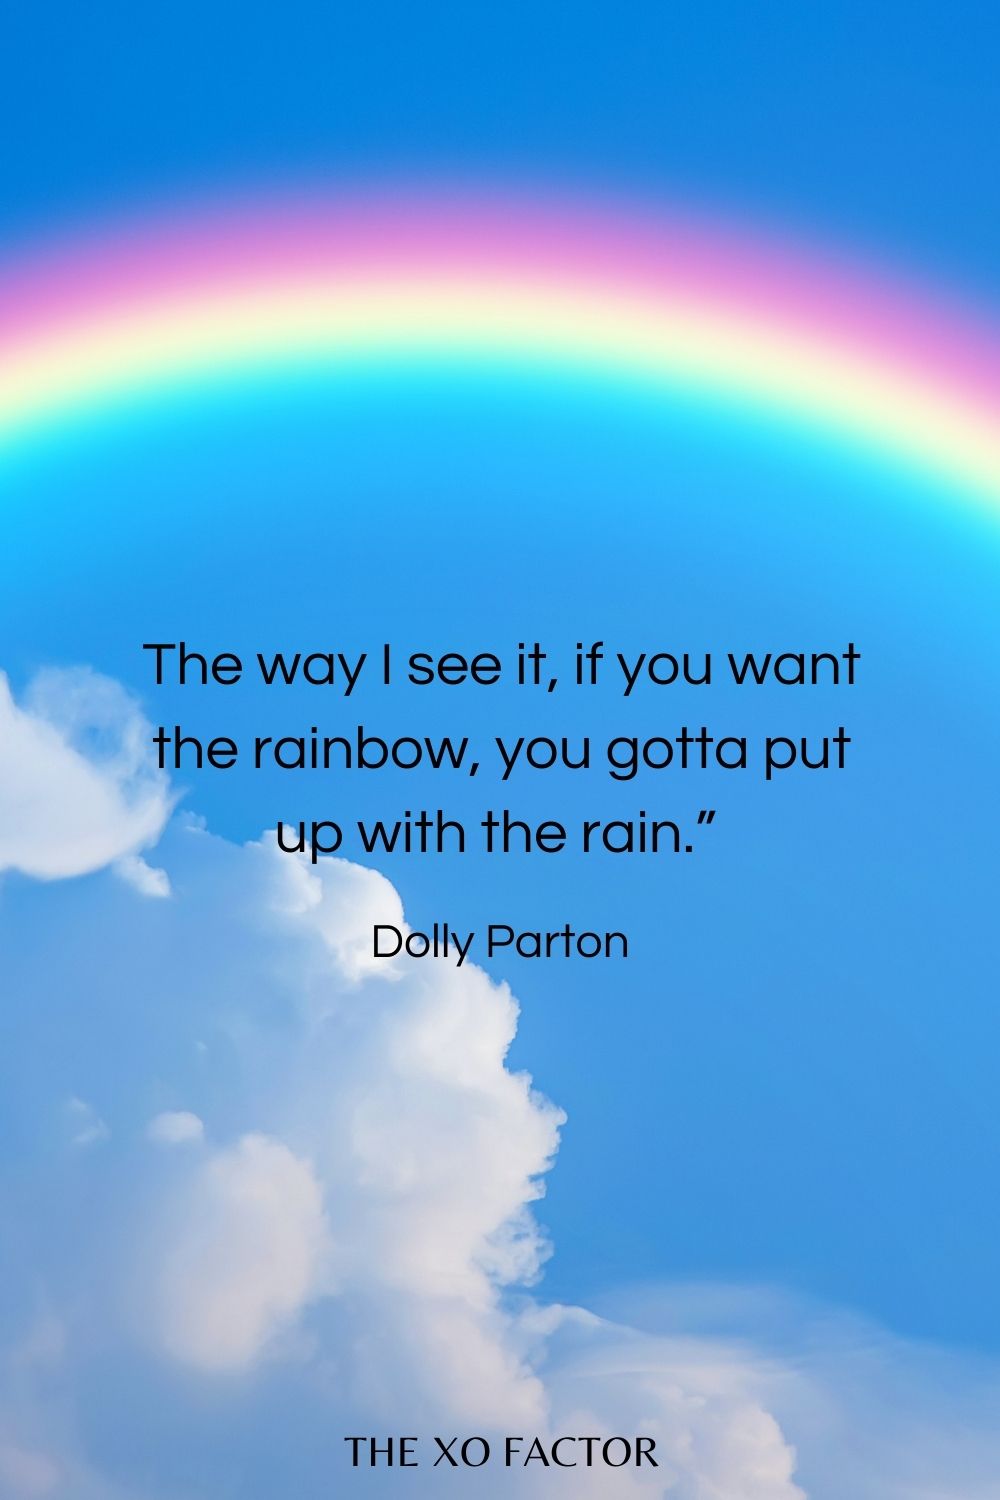 The way I see it, if you want the rainbow, you gotta put up with the rain.”  Dolly Parton